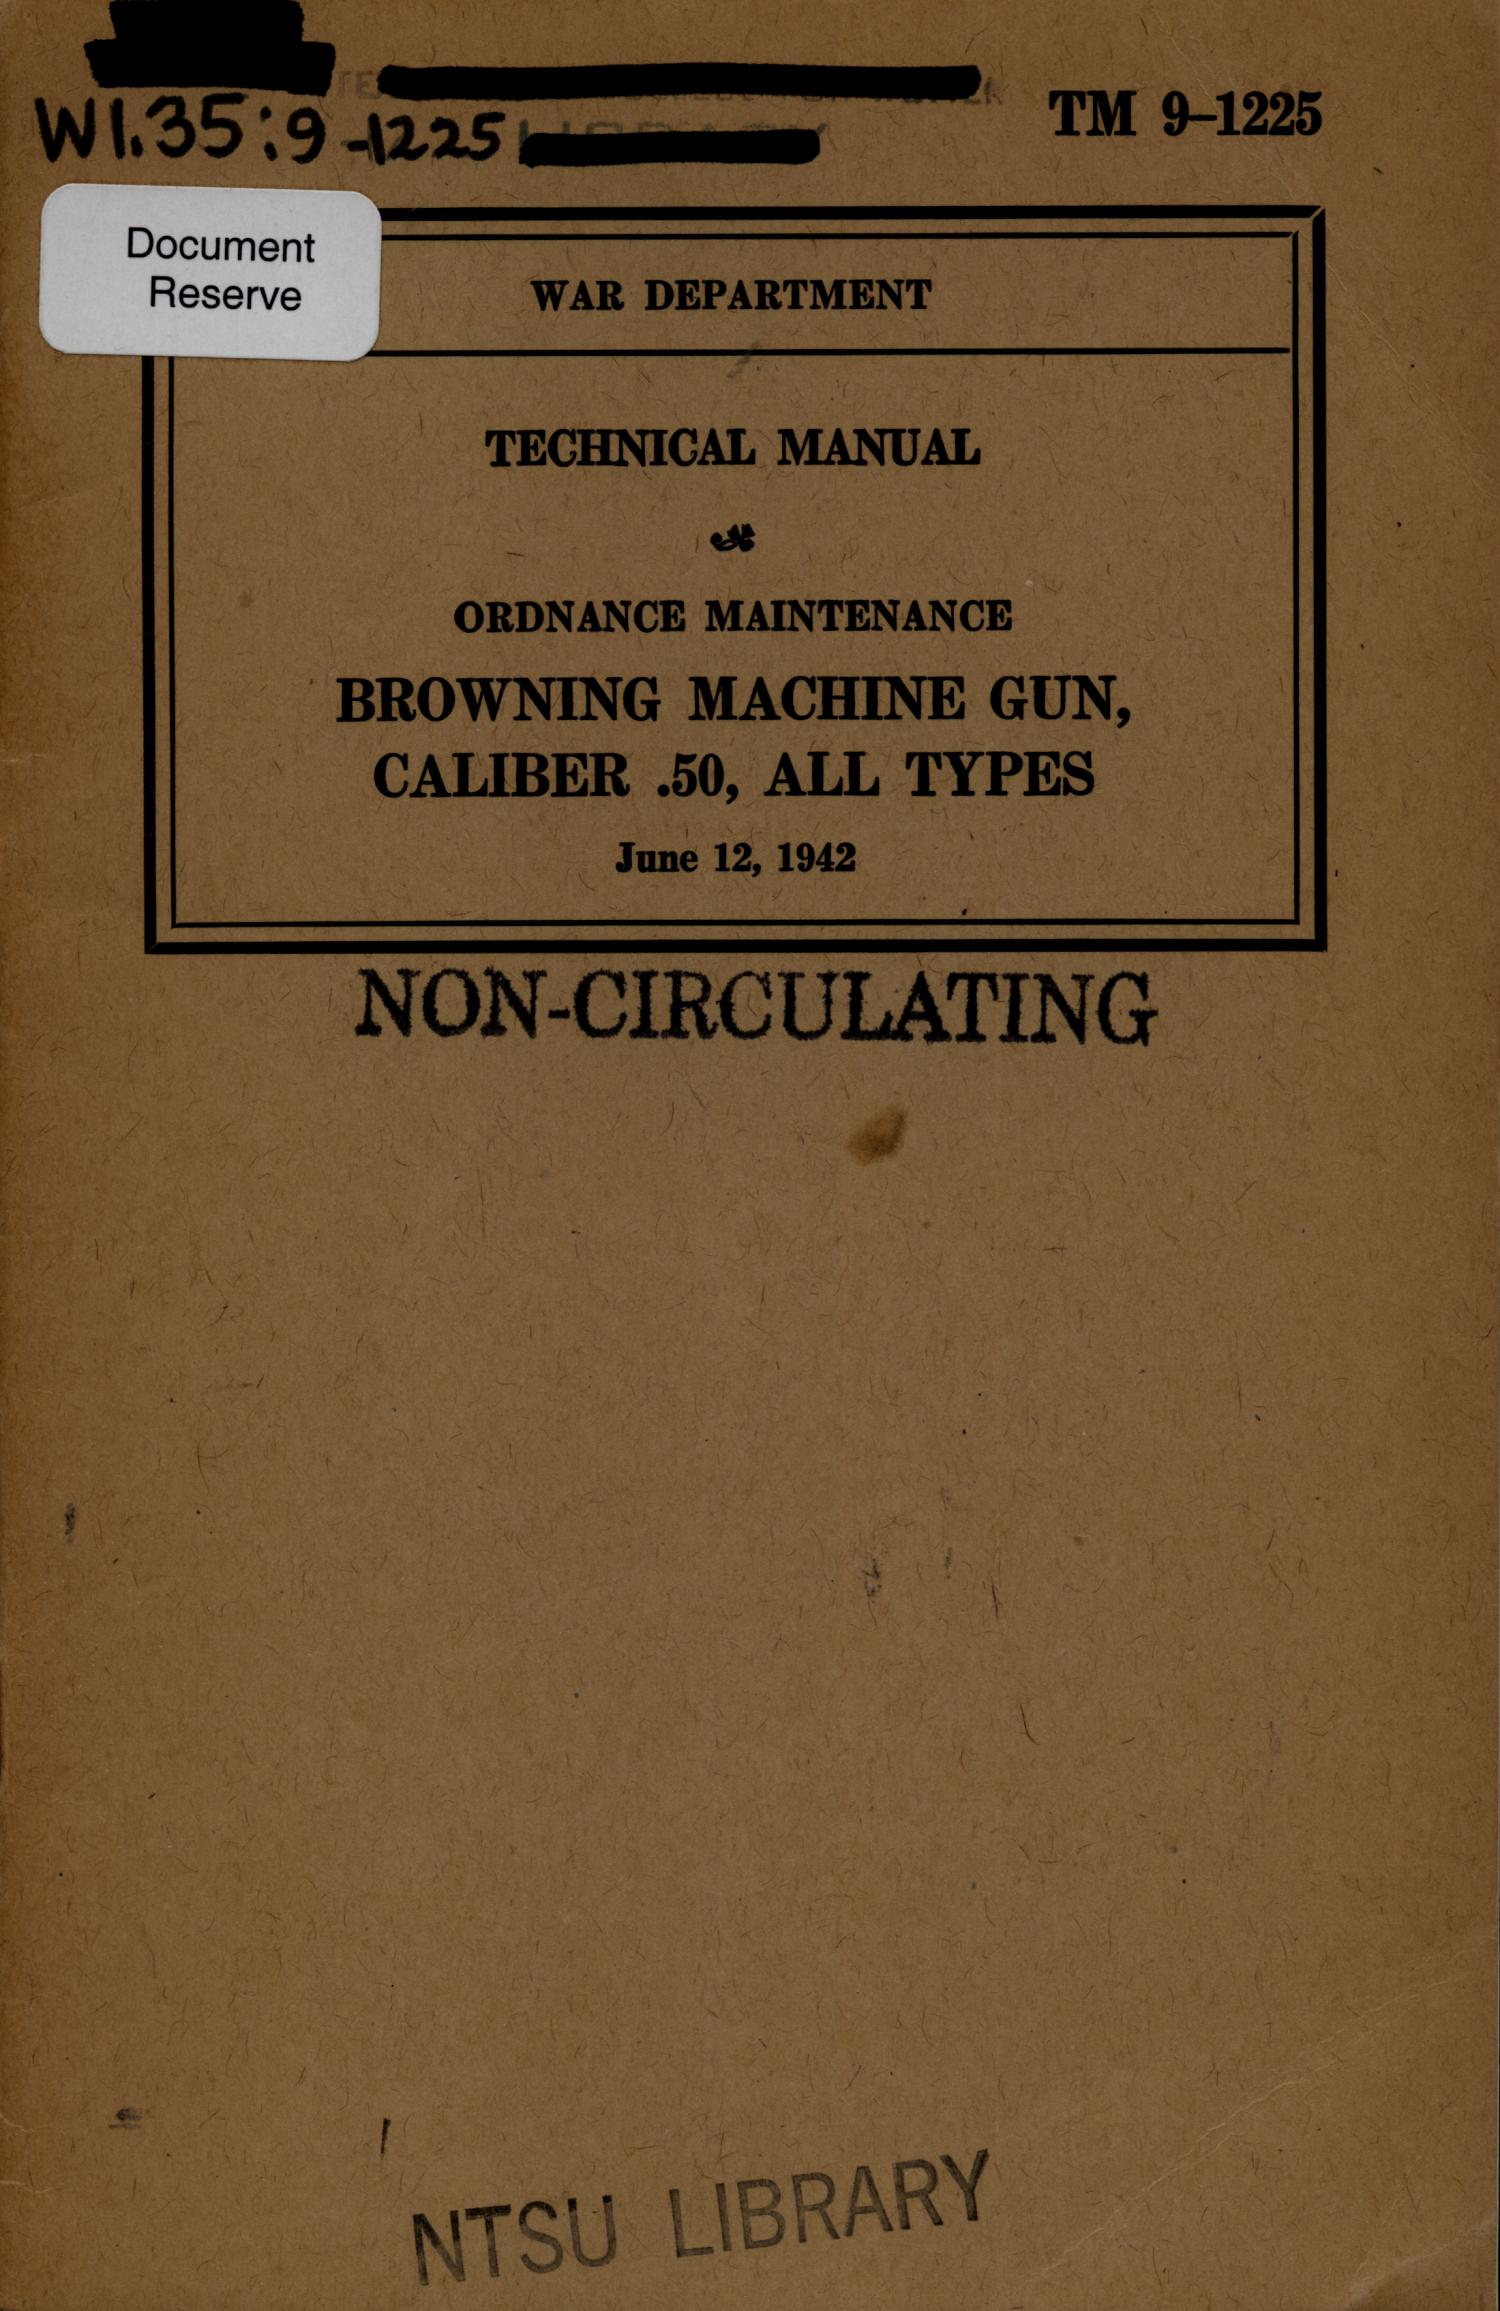 Ordnance maintenance : Browning machine gun, caliber .50, all types
                                                
                                                    Front Cover
                                                